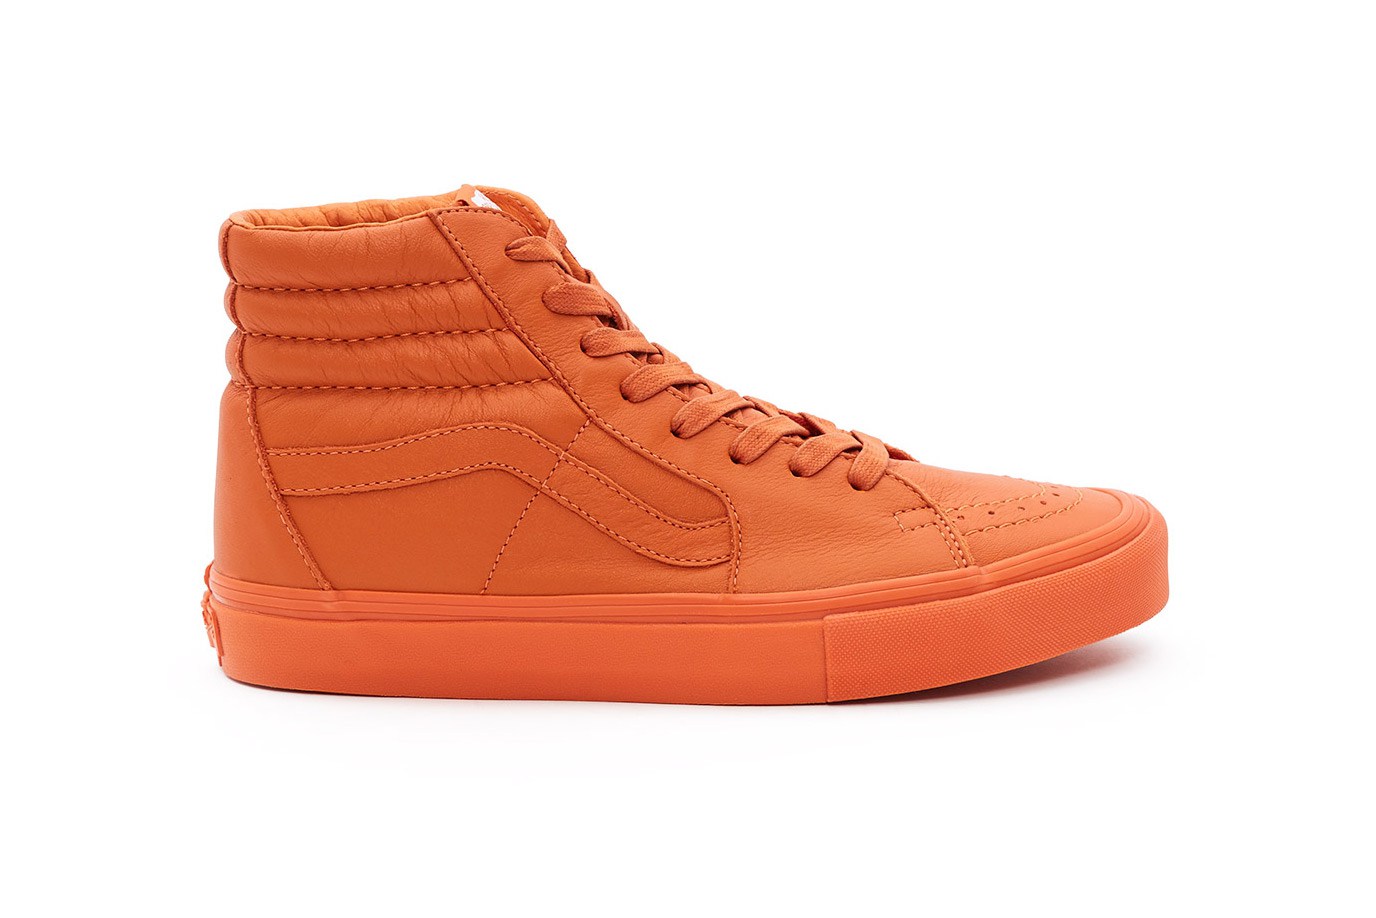 opening-ceremony-vans-leather-mono-pack-7